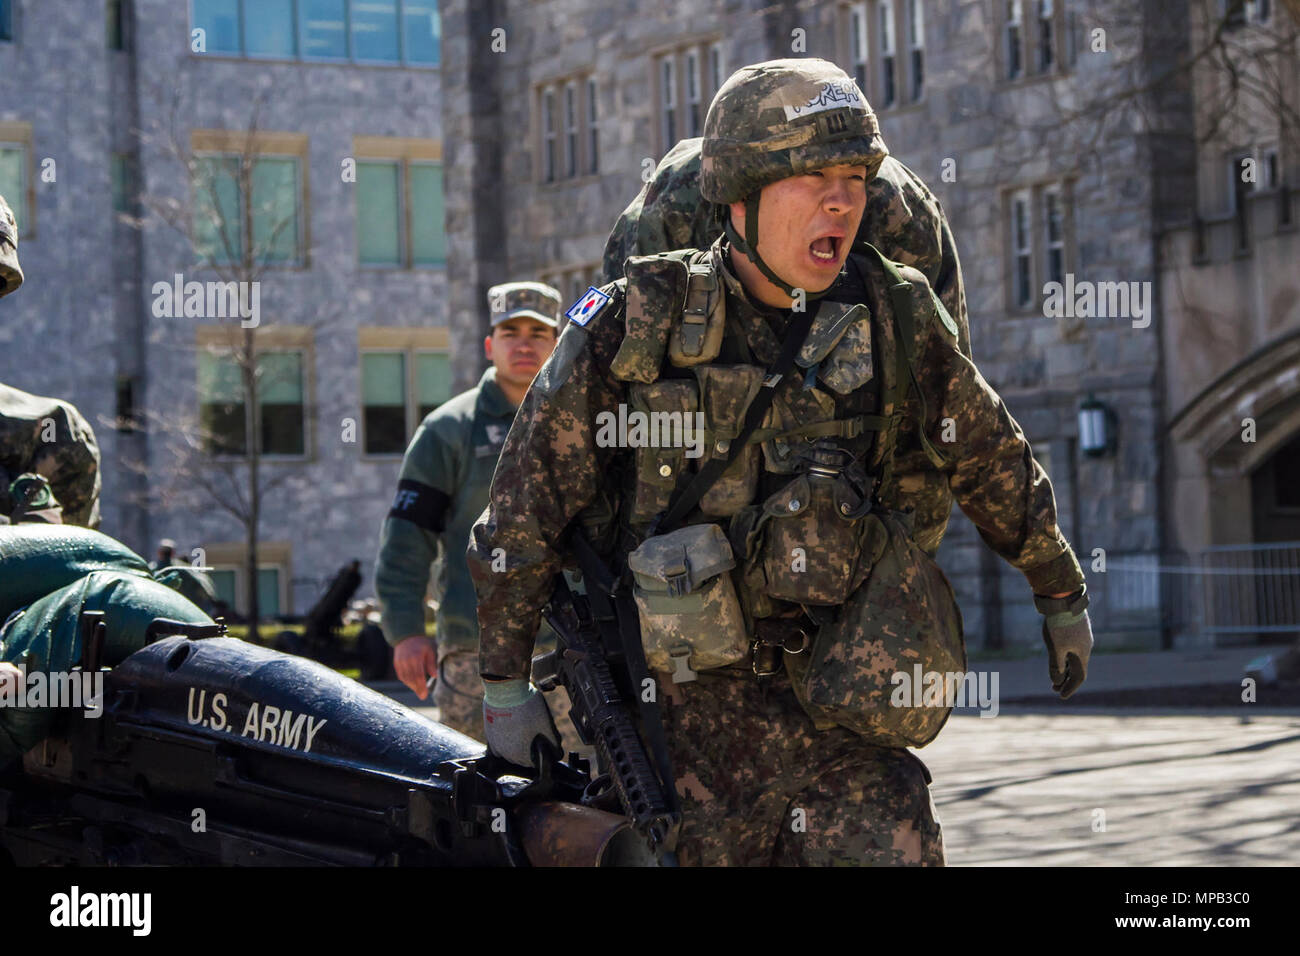 A South Korean army cadet leads his team in moving a howitzer, water cans and ammo boxes as part of the final event during the 2017 Sandhurst Military Skills Competition at the United States Military Academy, West Point, NY, April 8, 2017. During Sandhurst, 62 teams representing 12 international military academies, four U.S. service academies and eight ROTC programs competed in 11 events throughout a 23-mile course. Stock Photo